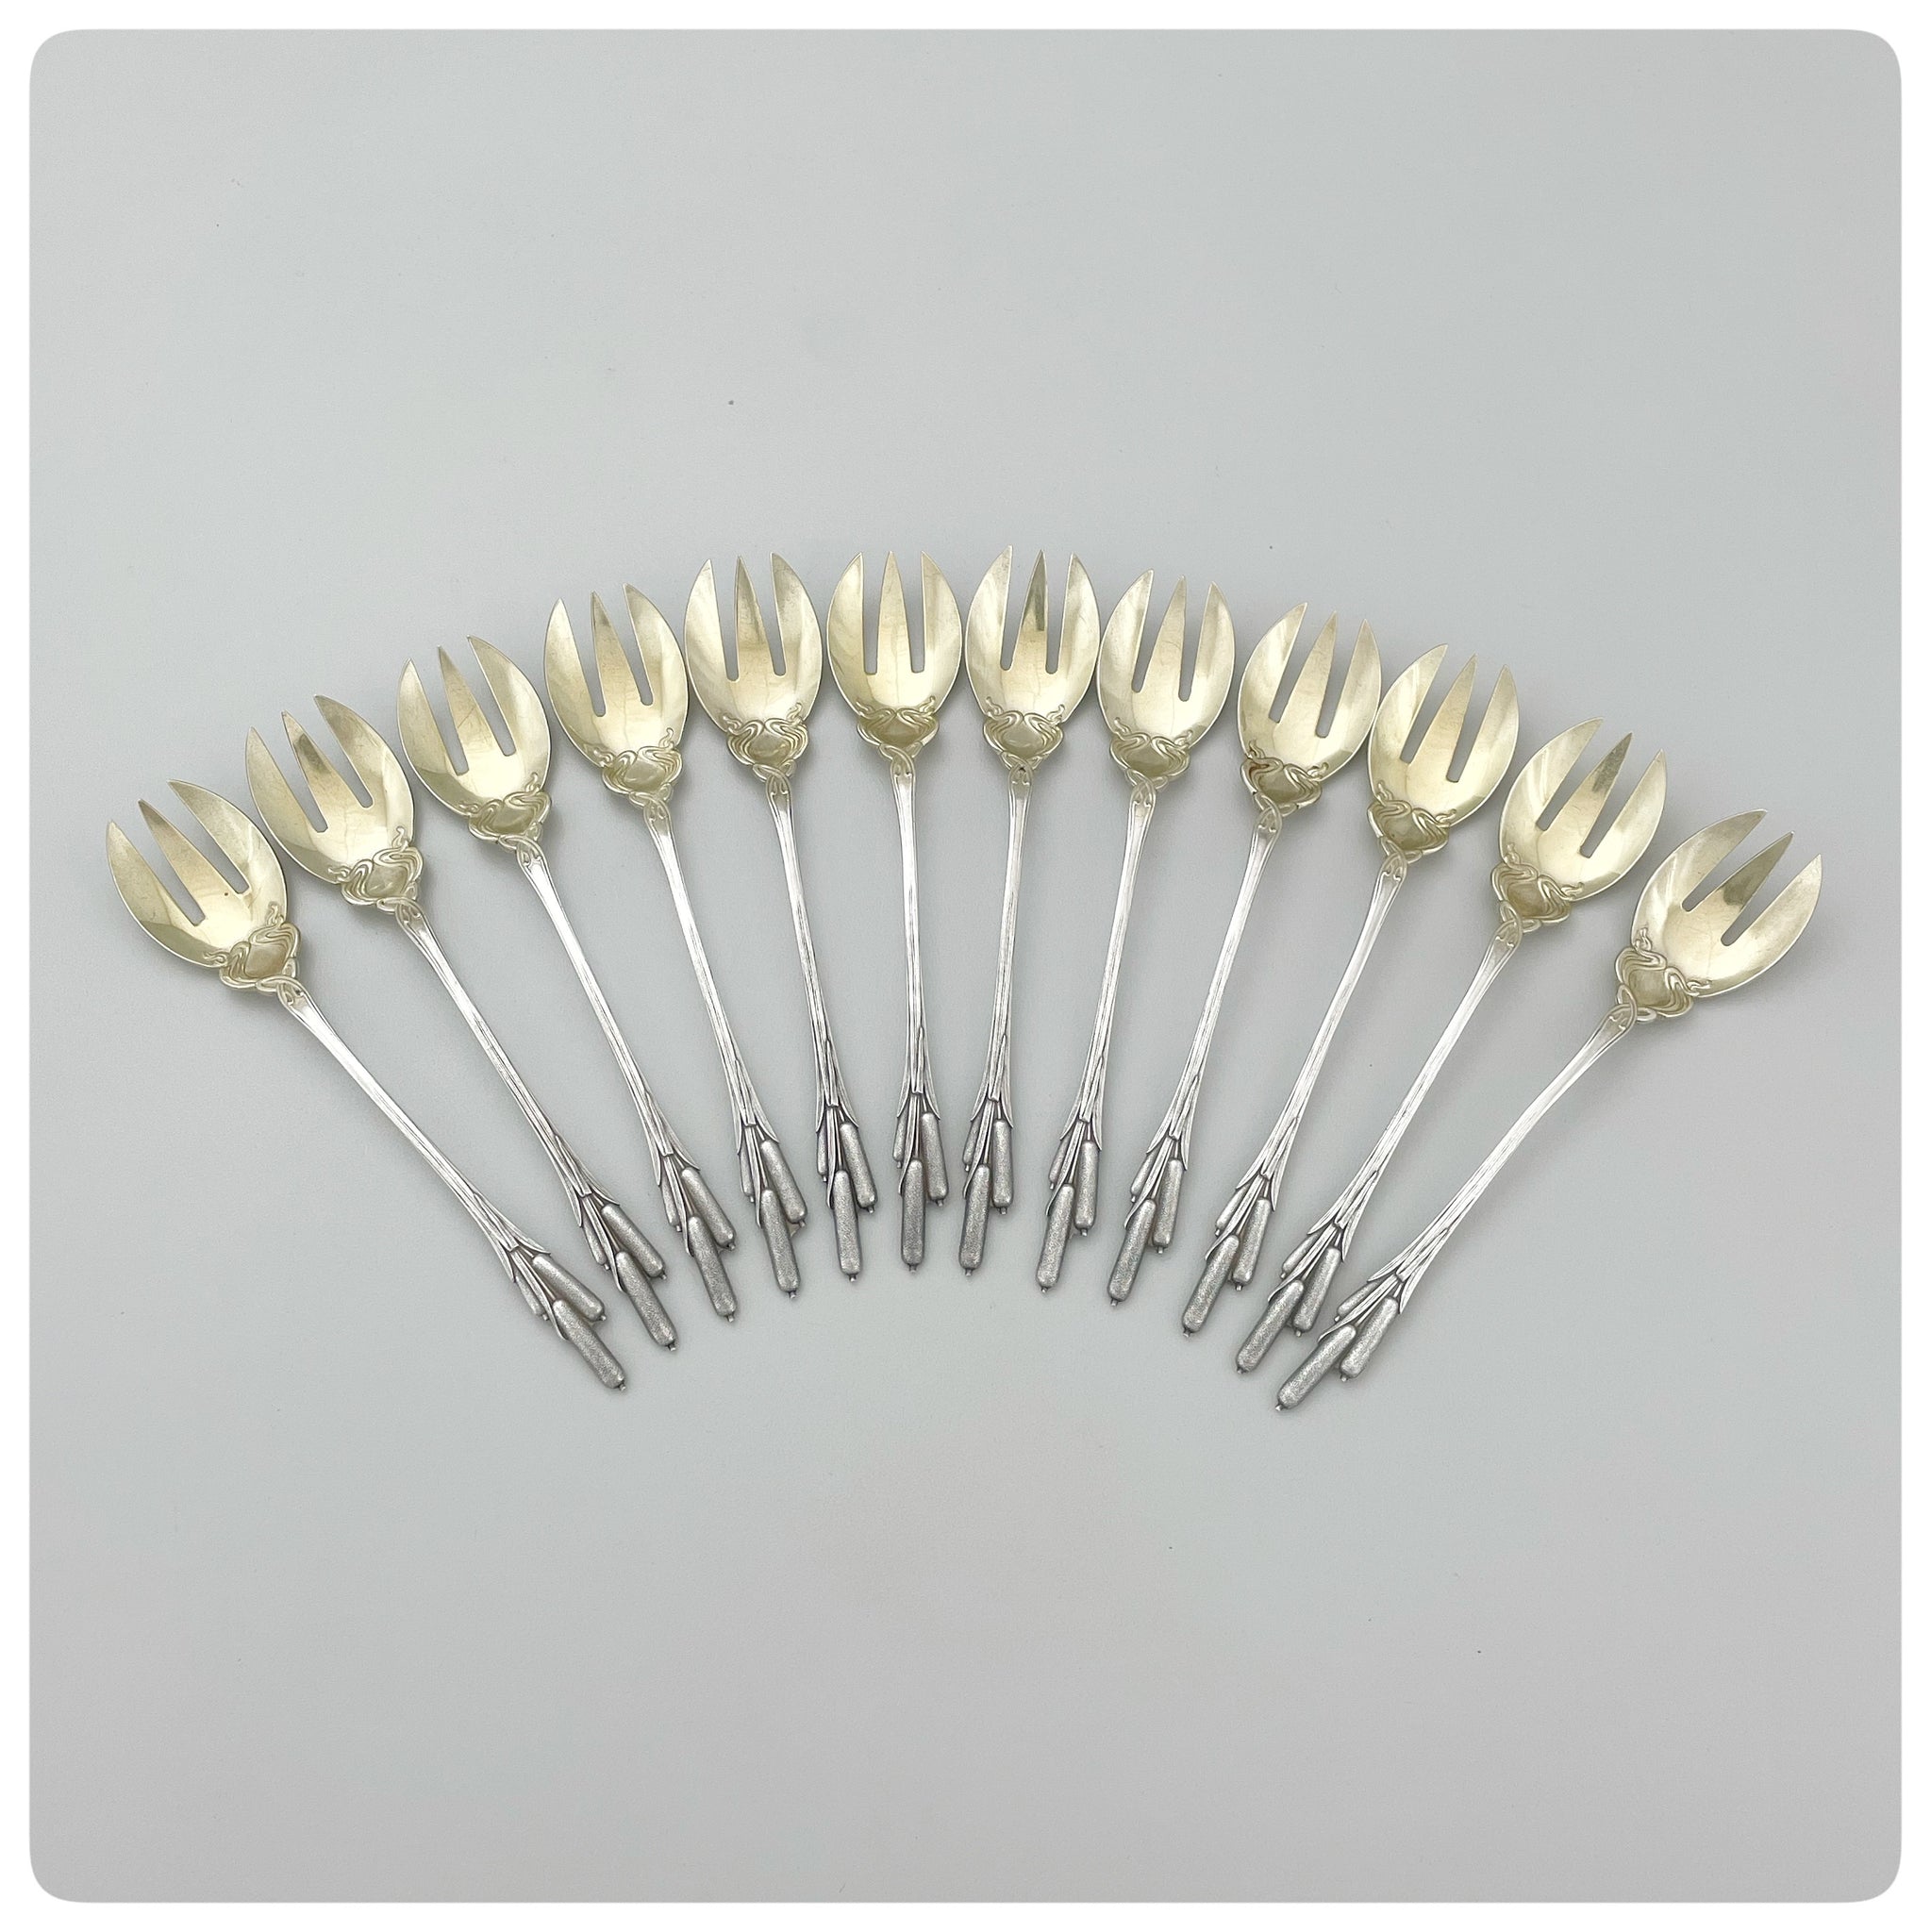 Set of Twelve Sterling Silver and Vermeil Ice Cream Forks in "Cat Tails", William B. Durgin Company, Concord, NH, Patented 1898